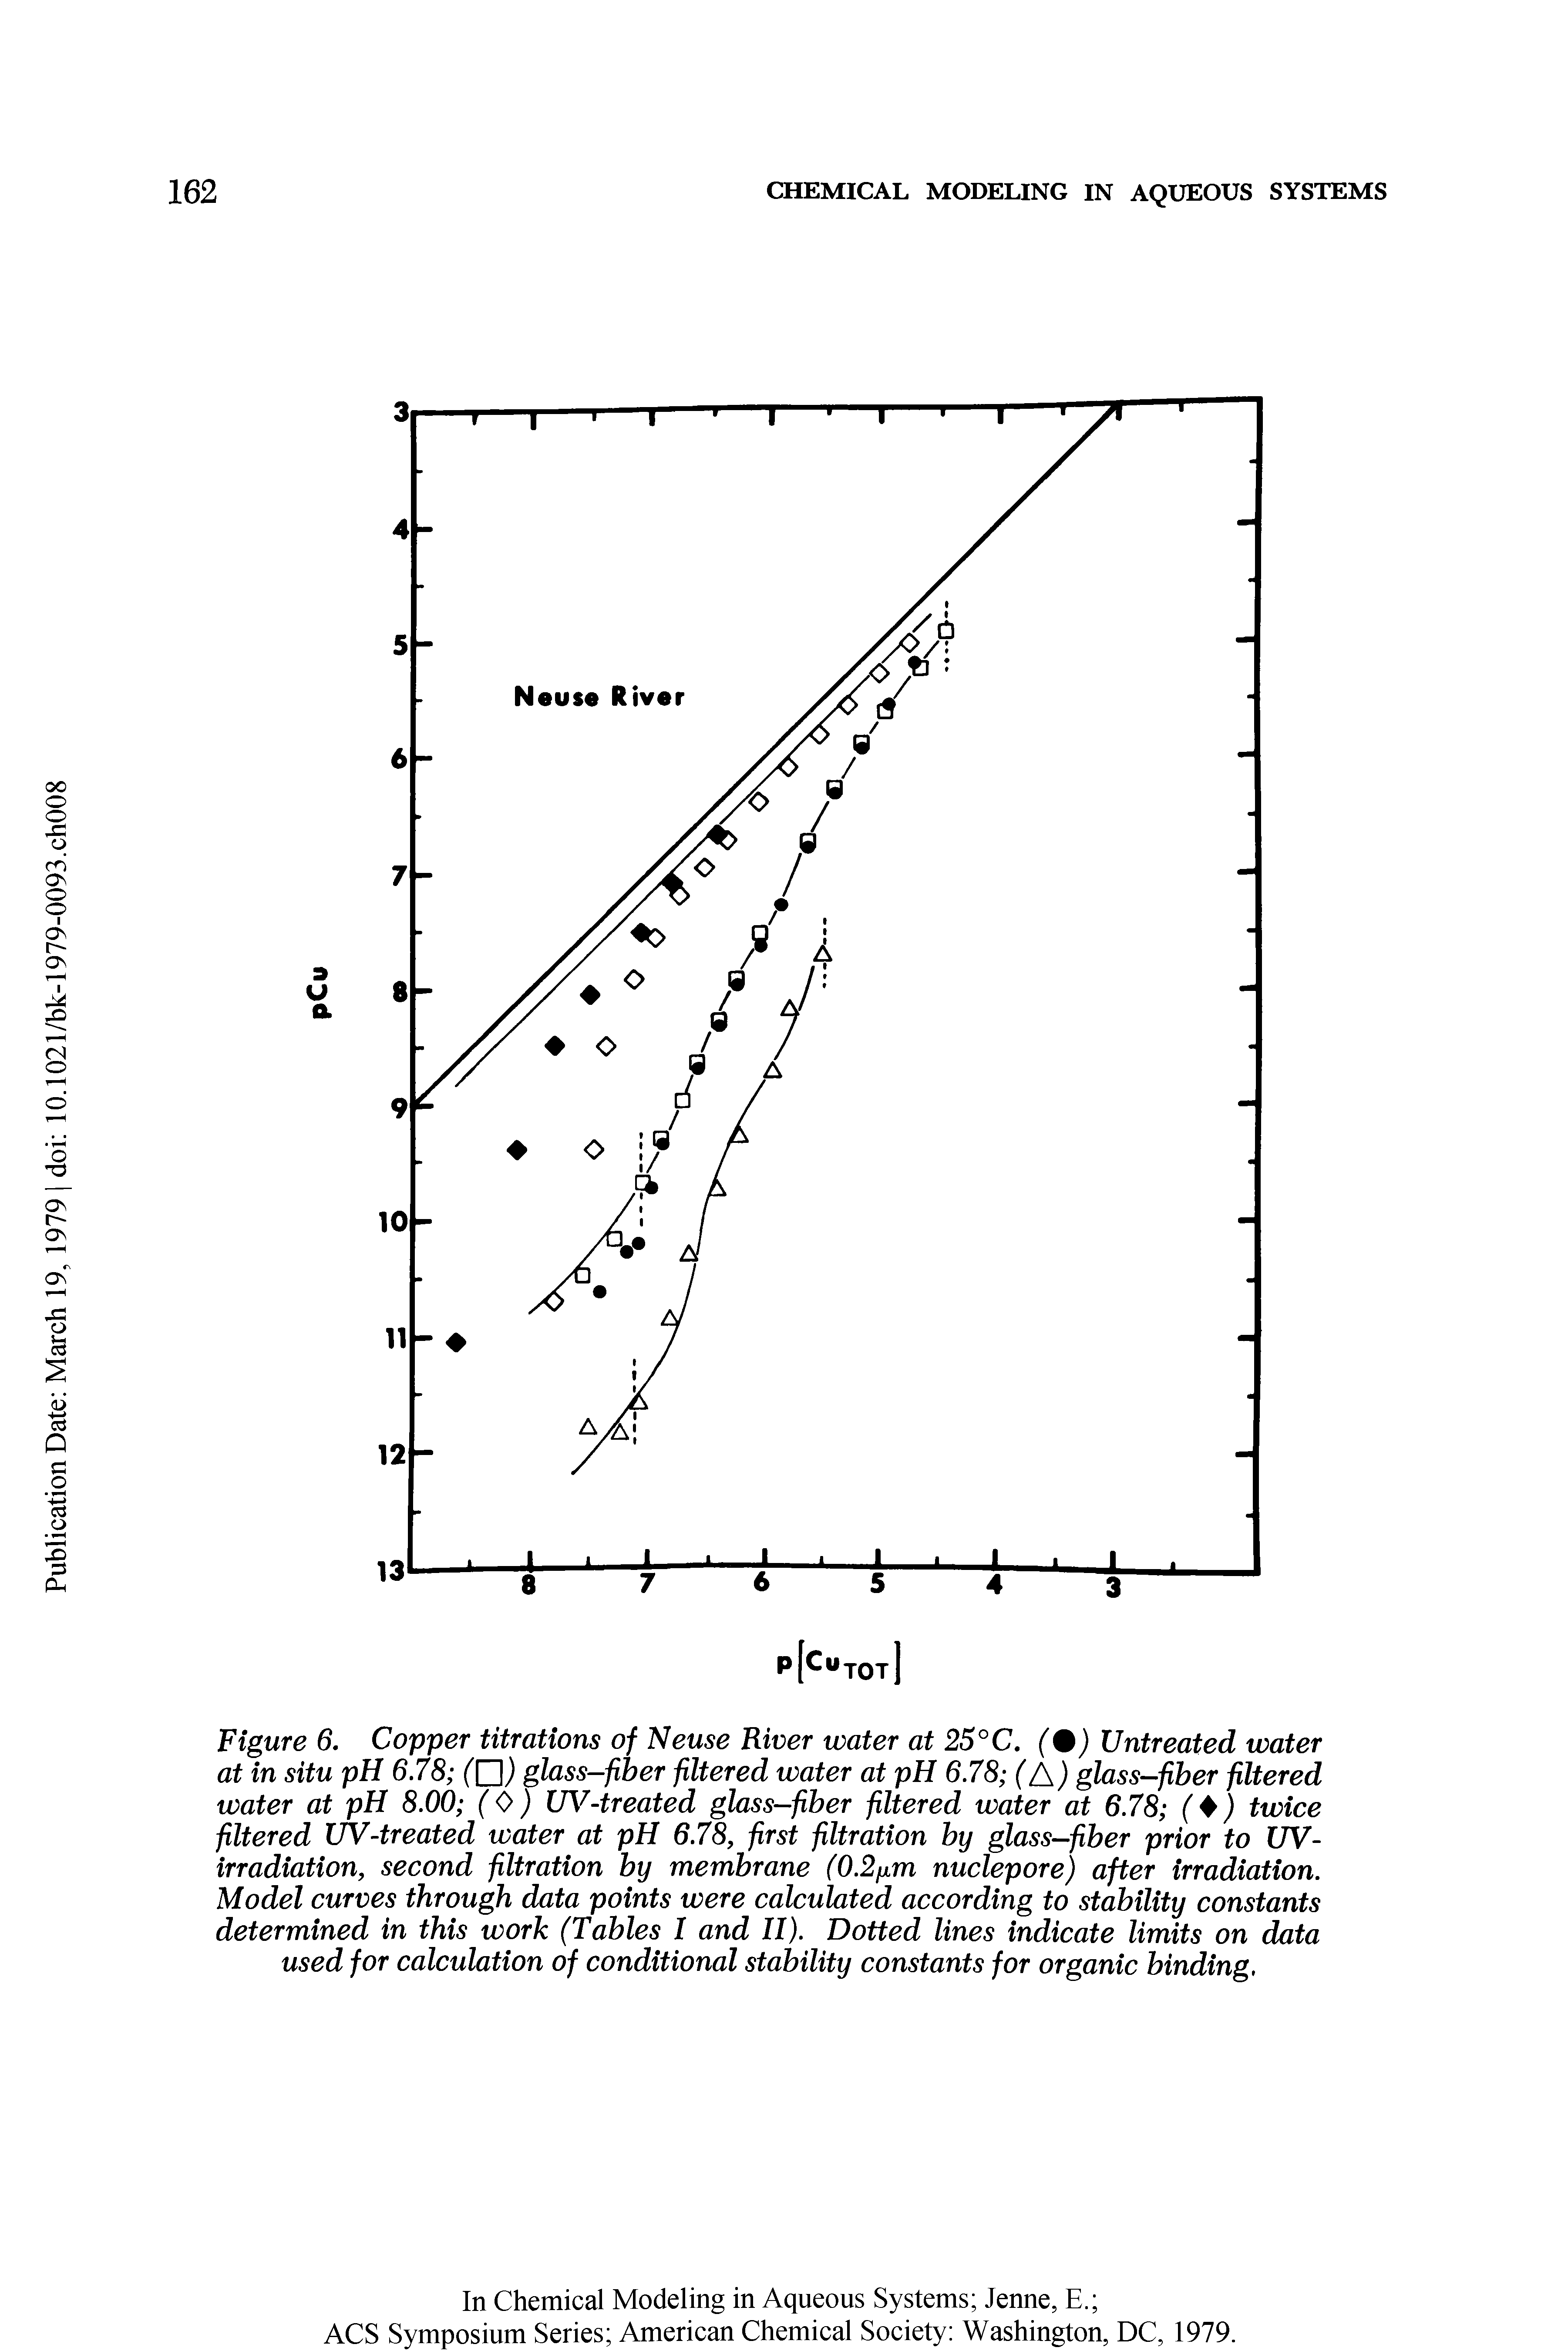 Figure 6. Copper titrations of Neuse River water at 25°C. (%) Untreated water at in situ pH 6.78 glass-fiber filtered water at pH 6.78 (A) glass-fiber filtered water at pH 8.00 (0) UV-treated glass—fiber filtered water at 6.78 (4) twice filtered XJV-treated water at pH 6.78, first filtration by glass-fiber prior to UV-irradiation, second filtration by membrane (0.2fxm nuclepore) after irradiation. Model curves through data points were calculated according to stability constants determined in this work (Tables I and II). Dotted lines indicate limits on data used for calculation of conditional stability constants for organic binding.